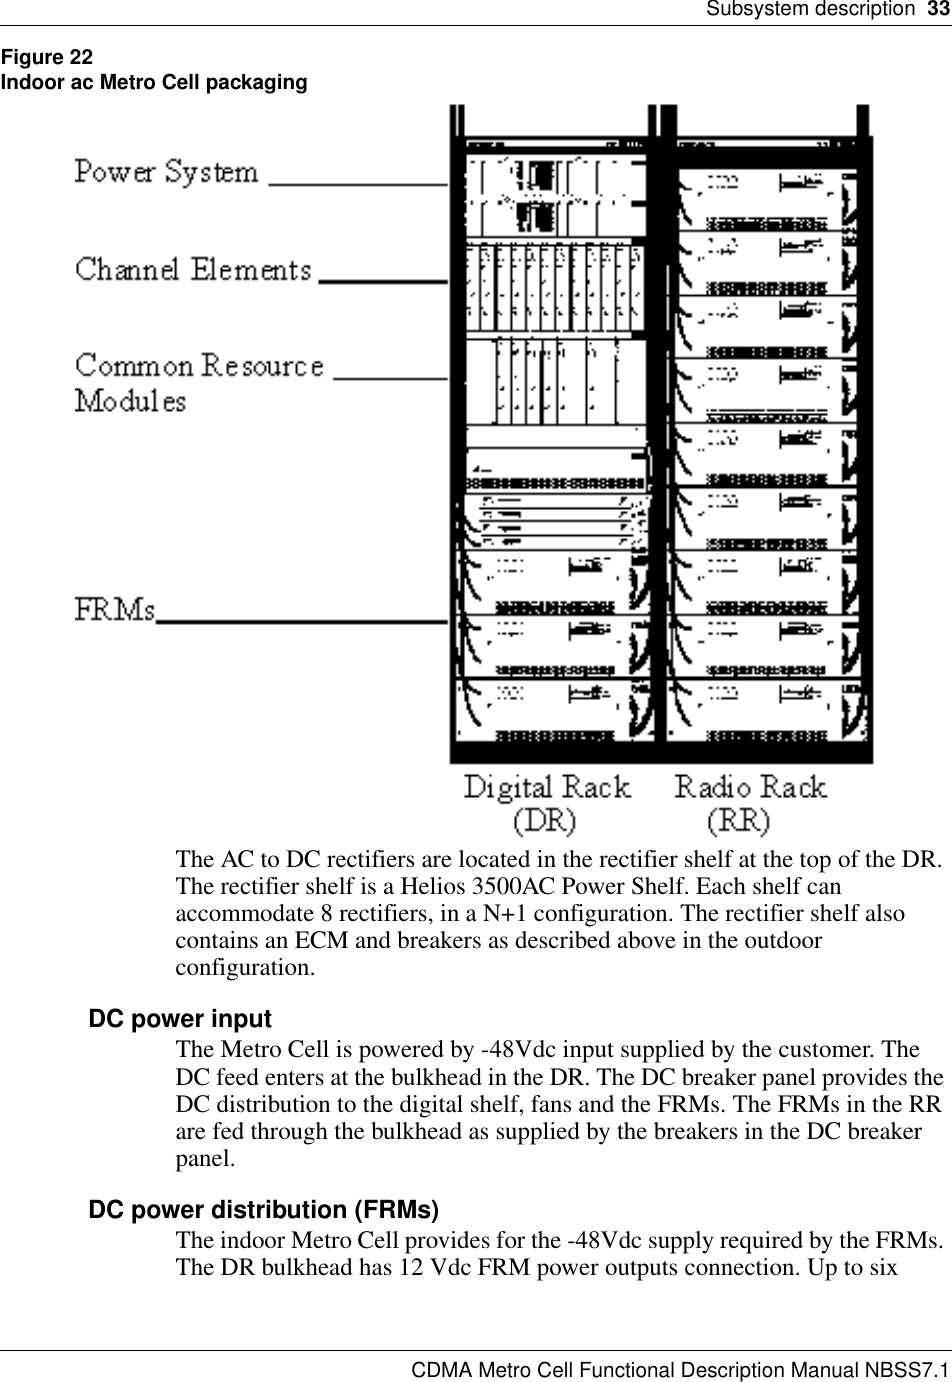 Subsystem description  33CDMA Metro Cell Functional Description Manual NBSS7.1Figure 22Indoor ac Metro Cell packagingThe AC to DC rectifiers are located in the rectifier shelf at the top of the DR. The rectifier shelf is a Helios 3500AC Power Shelf. Each shelf can accommodate 8 rectifiers, in a N+1 configuration. The rectifier shelf also contains an ECM and breakers as described above in the outdoor configuration.DC power inputThe Metro Cell is powered by -48Vdc input supplied by the customer. The DC feed enters at the bulkhead in the DR. The DC breaker panel provides the DC distribution to the digital shelf, fans and the FRMs. The FRMs in the RR are fed through the bulkhead as supplied by the breakers in the DC breaker panel.DC power distribution (FRMs)The indoor Metro Cell provides for the -48Vdc supply required by the FRMs. The DR bulkhead has 12 Vdc FRM power outputs connection. Up to six 